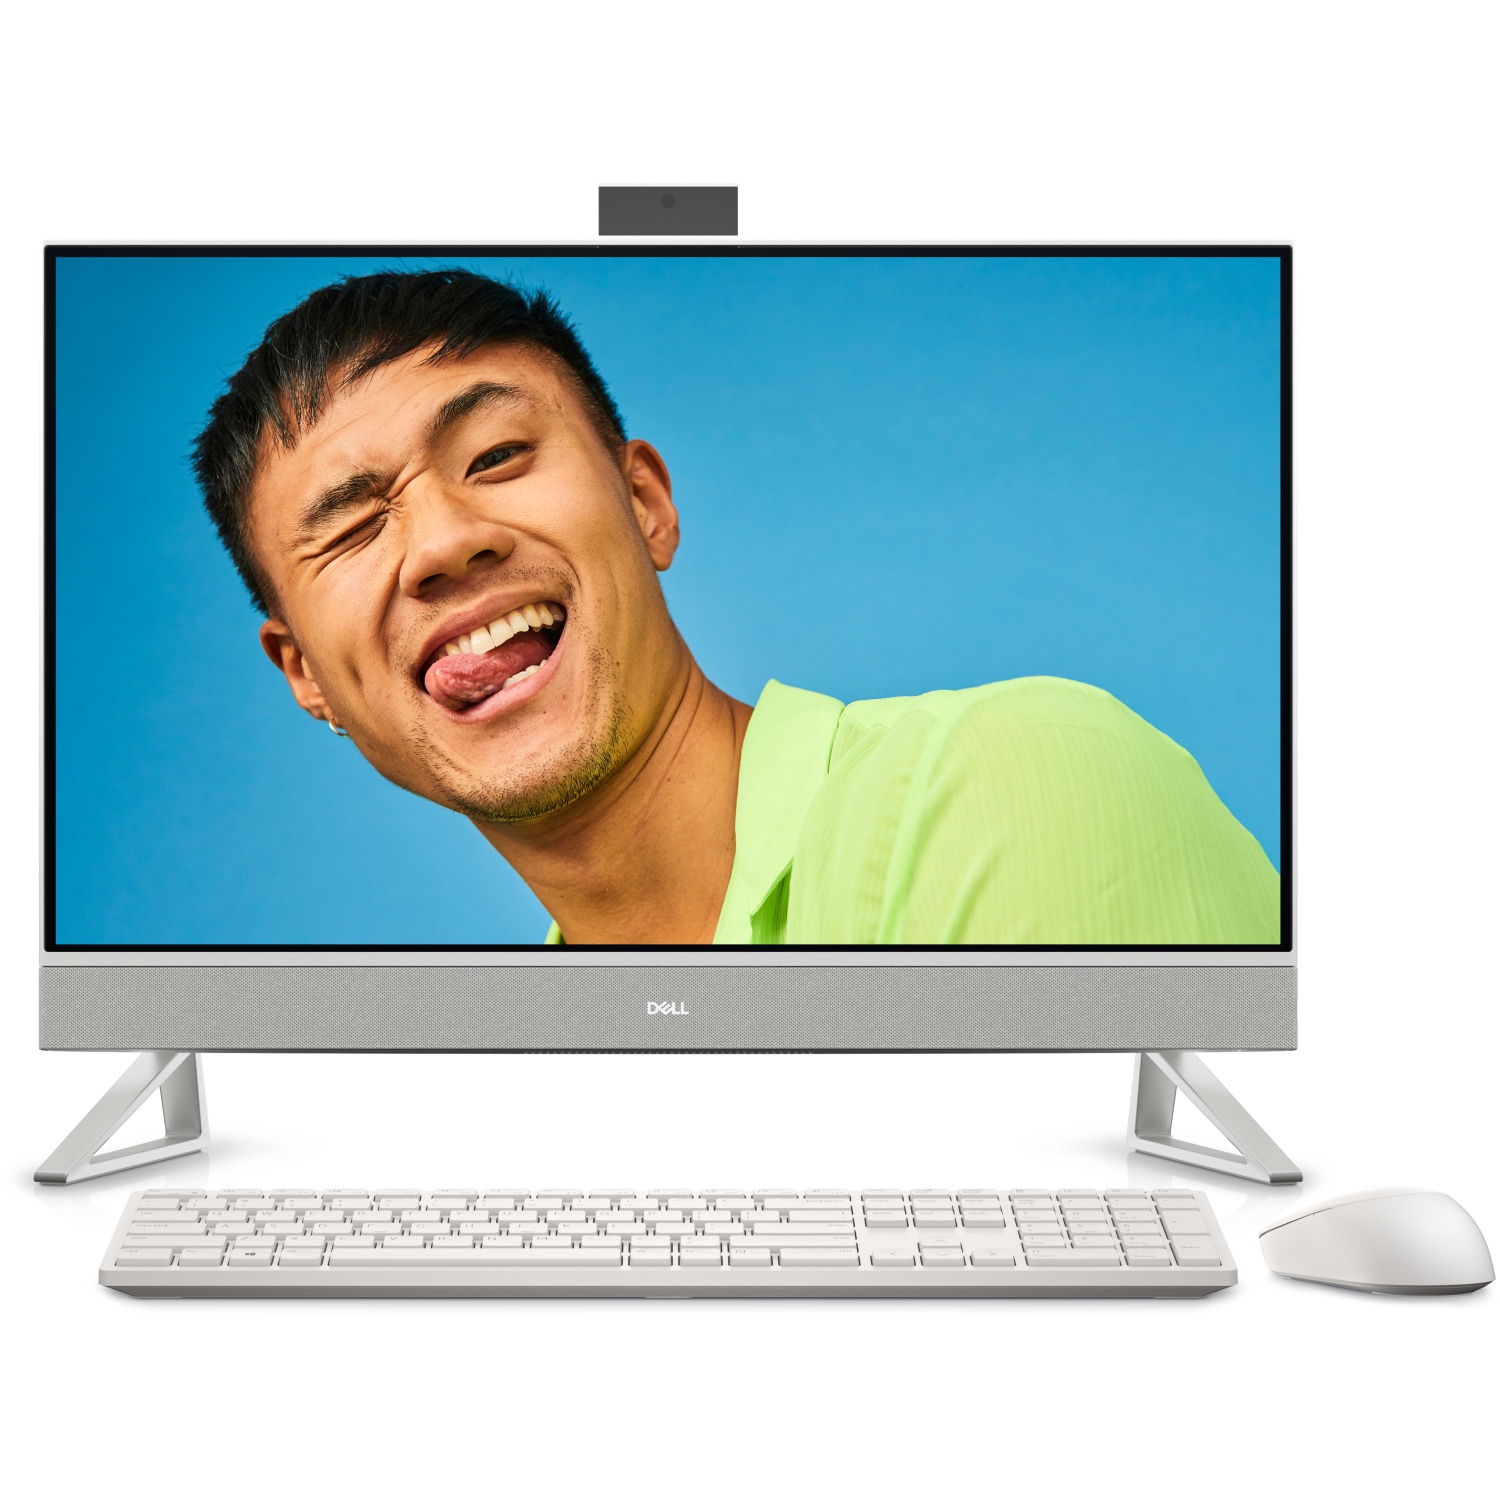 Refurbished (Excellent) – Dell Inspiron 7710 AIO (2022) | 27" FHD | Core i7 - 1TB SSD + 1TB HDD - 16GB RAM - GeForce MX550 | 10 Cores @ 4.7 GHz - 12th Gen CPU